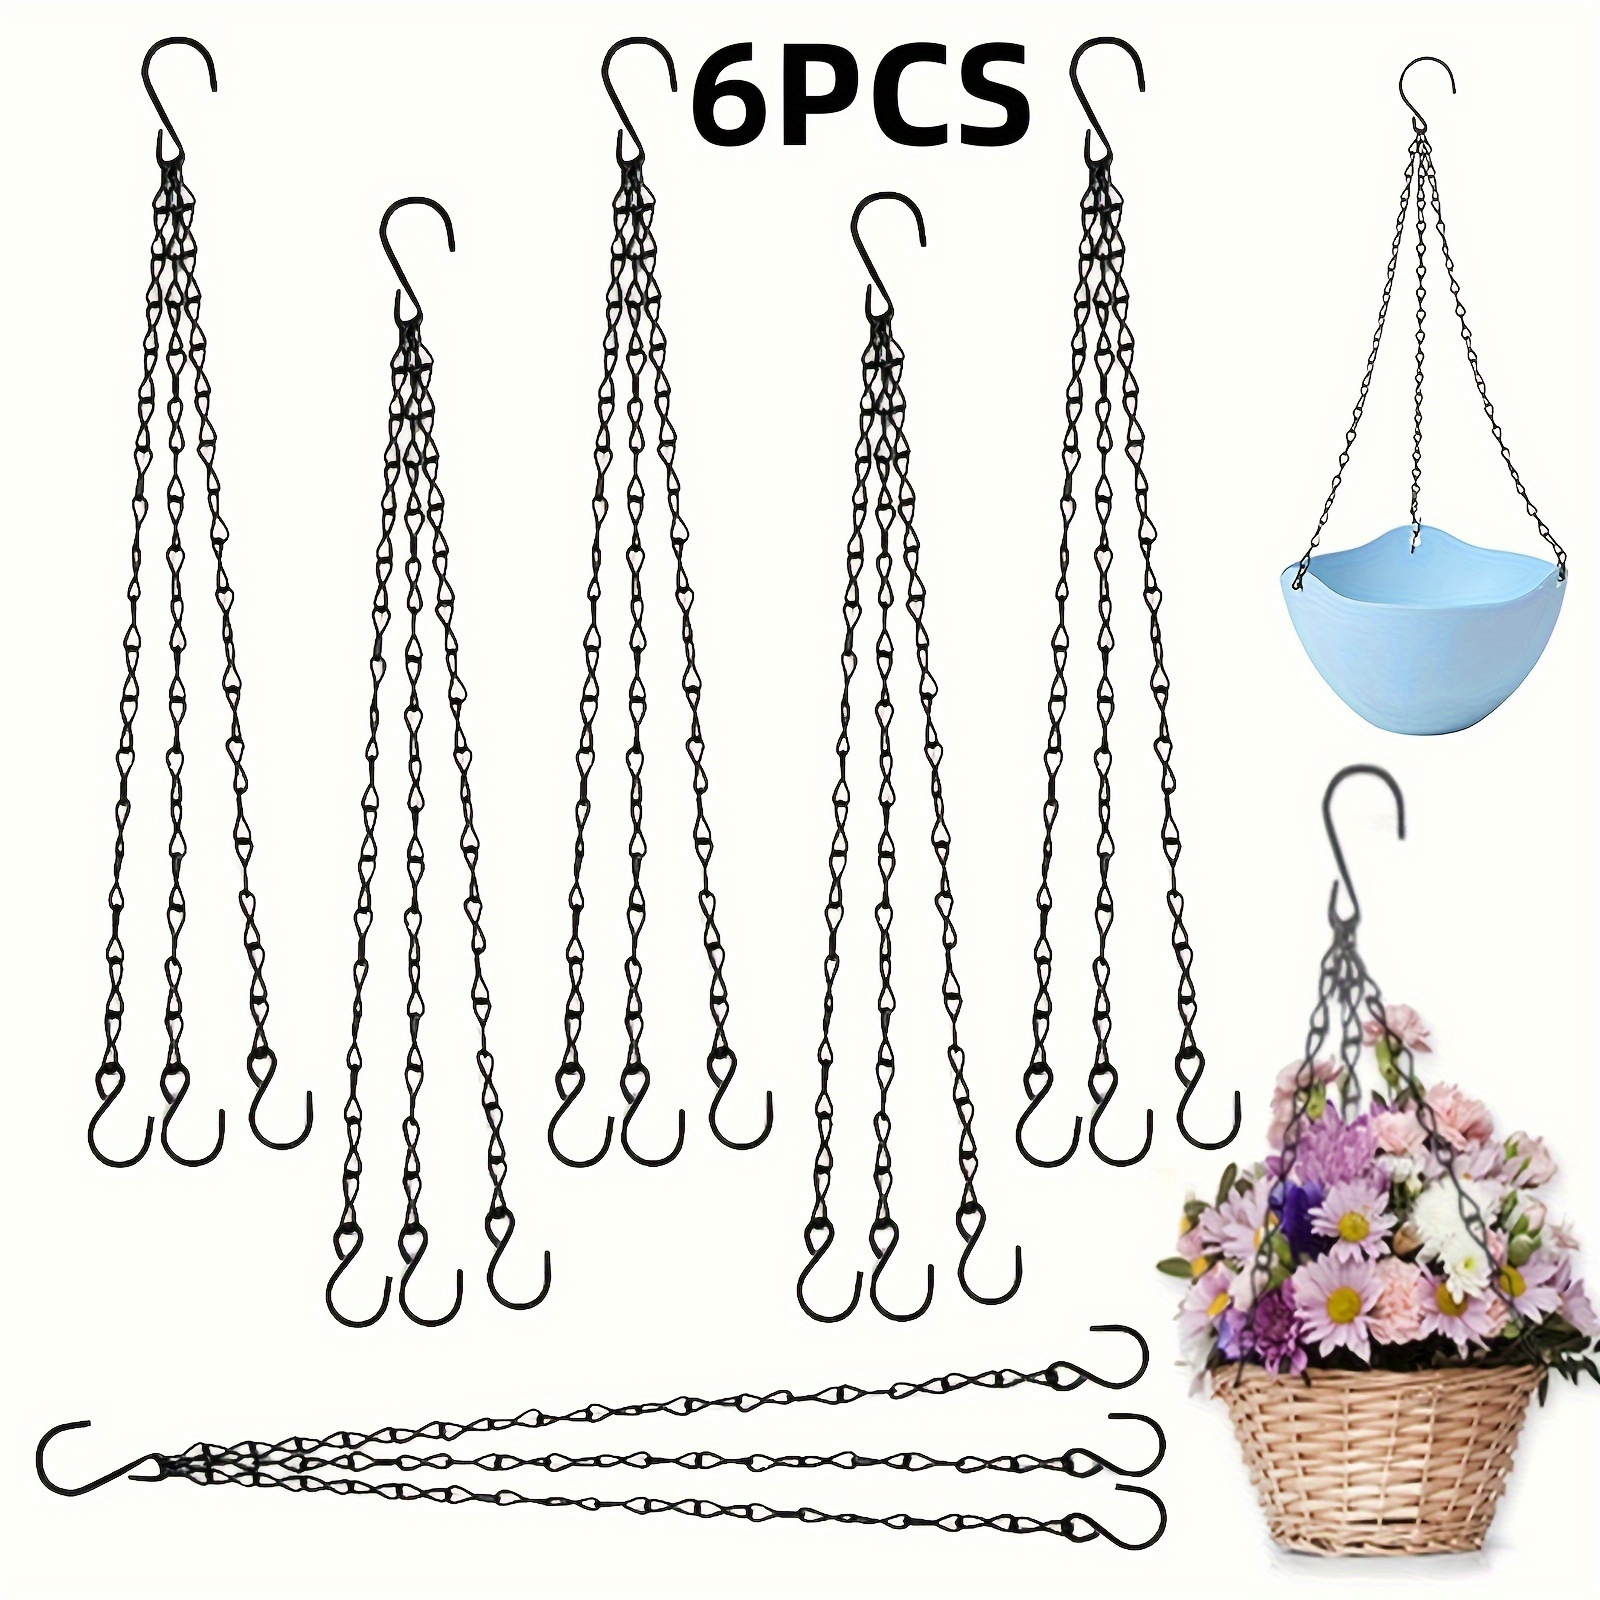 

6pcs, Black Hanging Chains With S-hooks, 16.54 Inches Durable Iron Plant Hangers For Garden Flower Pots And Baskets, Versatile Chain Hangings For Outdoor And Indoor Use